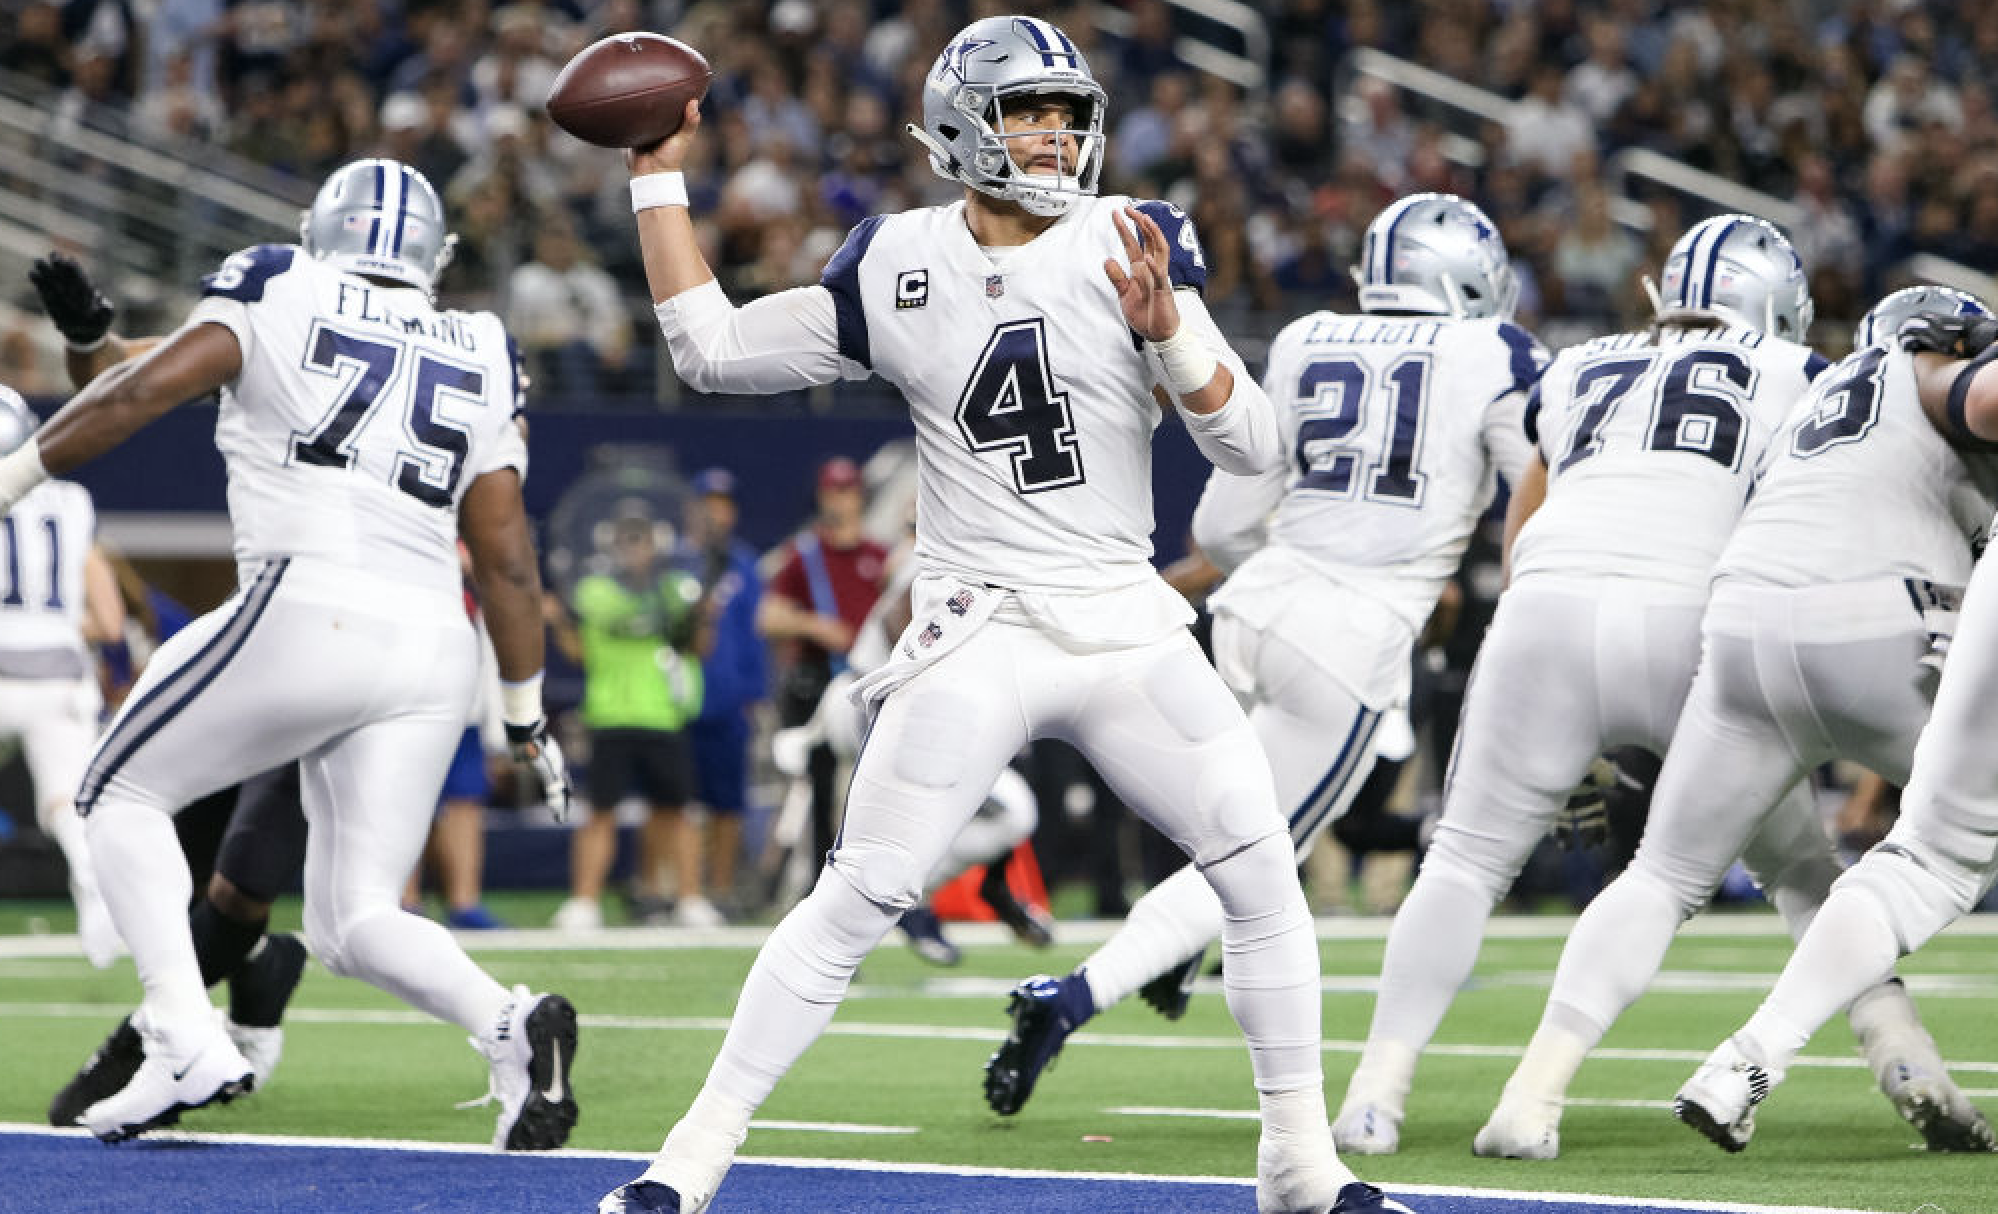 ARLINGTON, TX - NOVEMBER 29: Dallas Cowboys Quarterback Dak Prescott (4) drops back to pass during the game between the Dallas Cowboys and New Orleans Saints on November 29, 2018 at AT&T Stadium in Arlington, TX. (Photo by Andrew Dieb/Icon Sportswire via Getty Images)